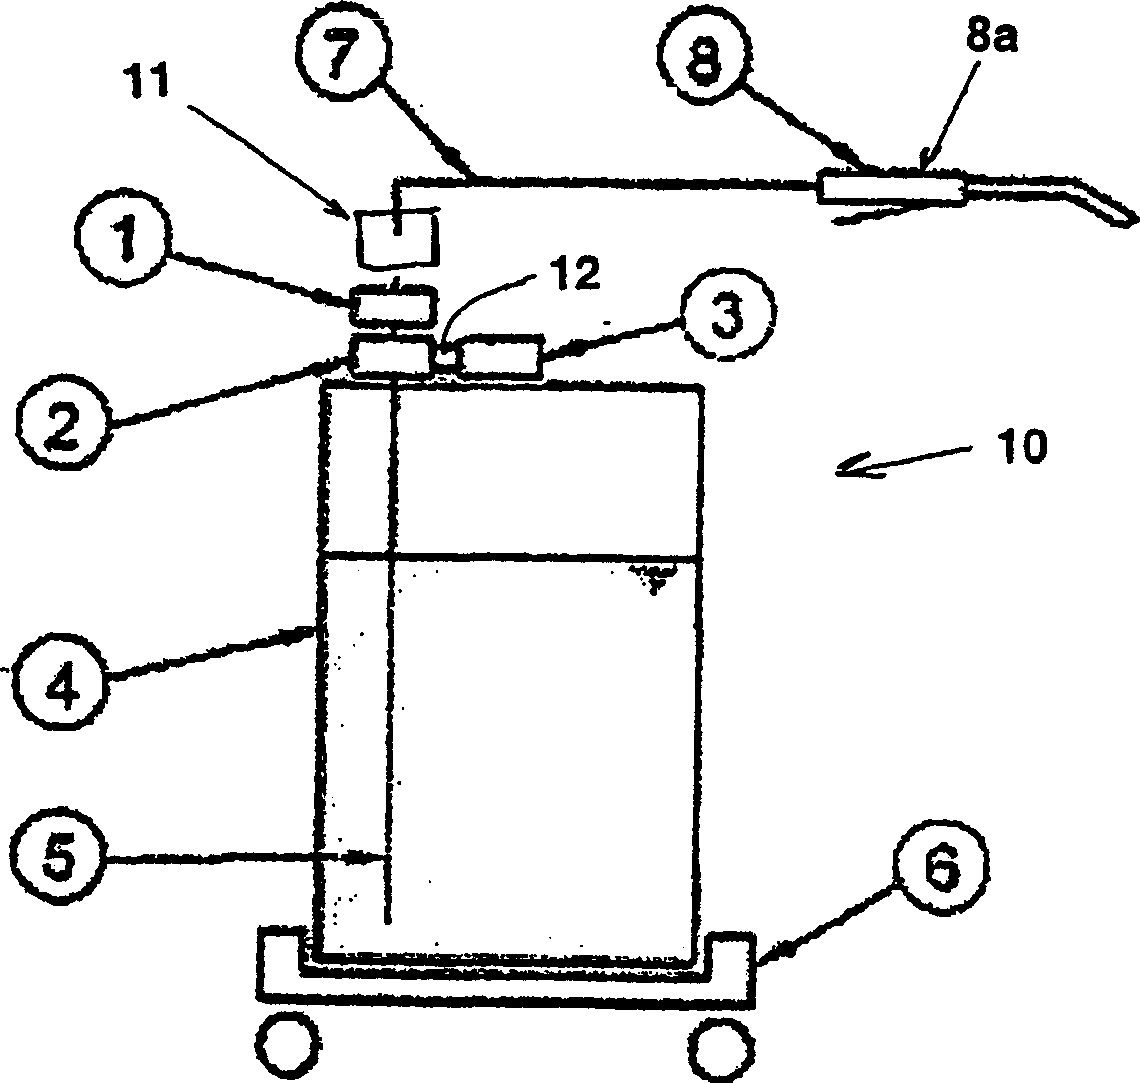 Self contained lubricant dispenser